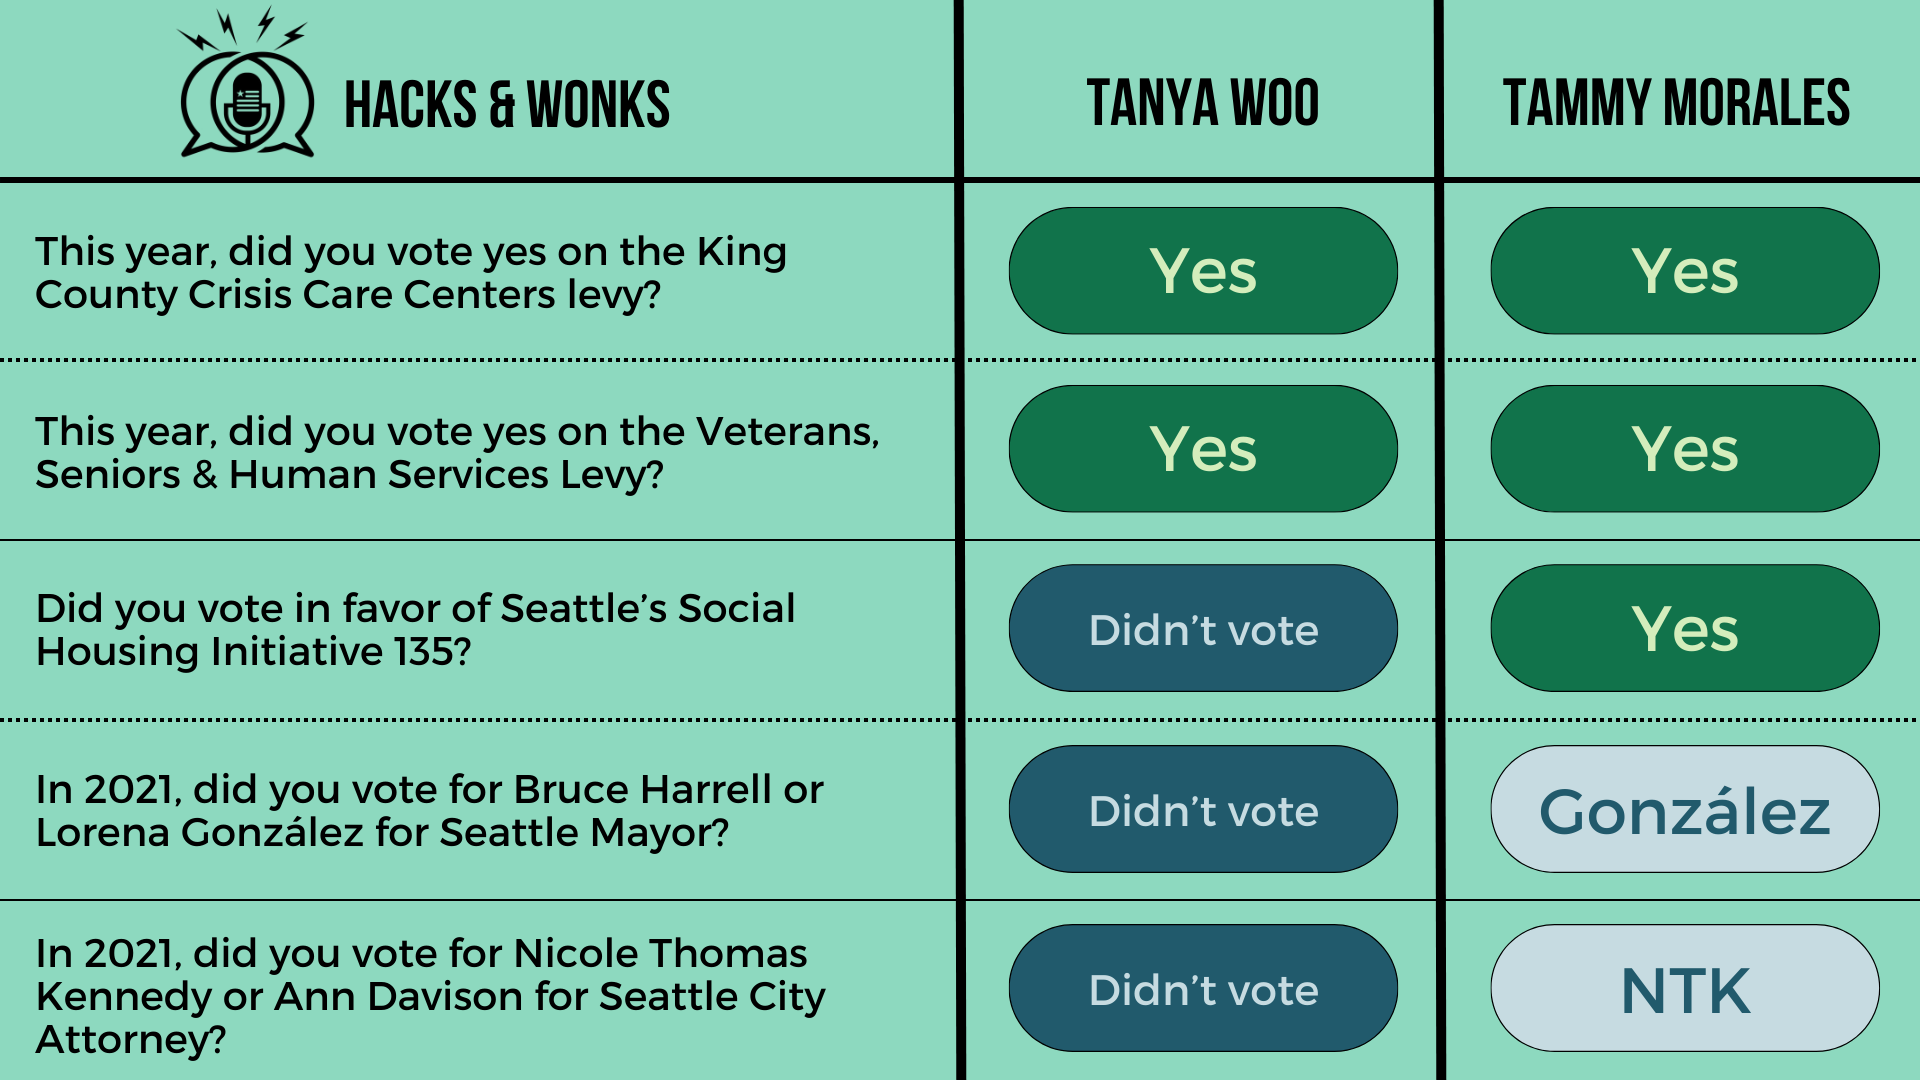 Q: This year, did you vote yes on the King County Crisis Care Centers levy? Tanya Woo: Yes, Tammy Morales: Yes  Q: This year, did you vote yes on the Veterans, Seniors & Human Services Levy? Tanya Woo: Yes, Tammy Morales: Yes  Q: Did you vote in favo